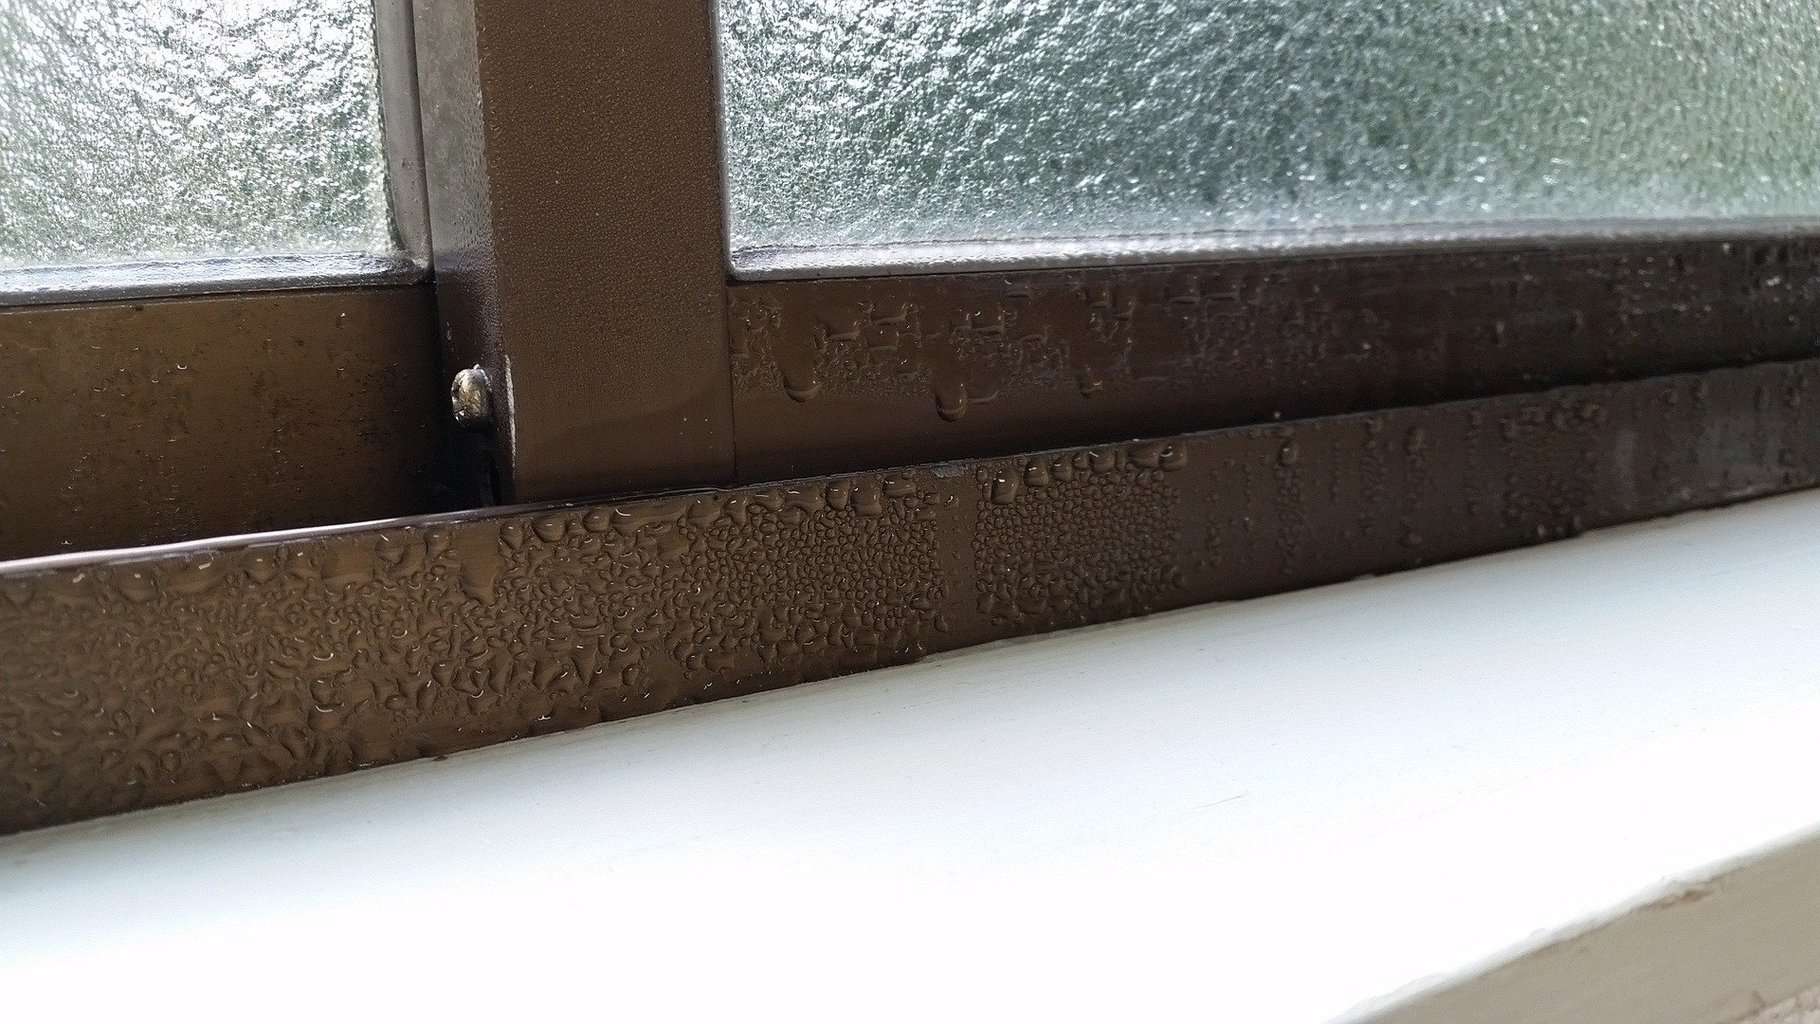 Why does condensation appear inside windows